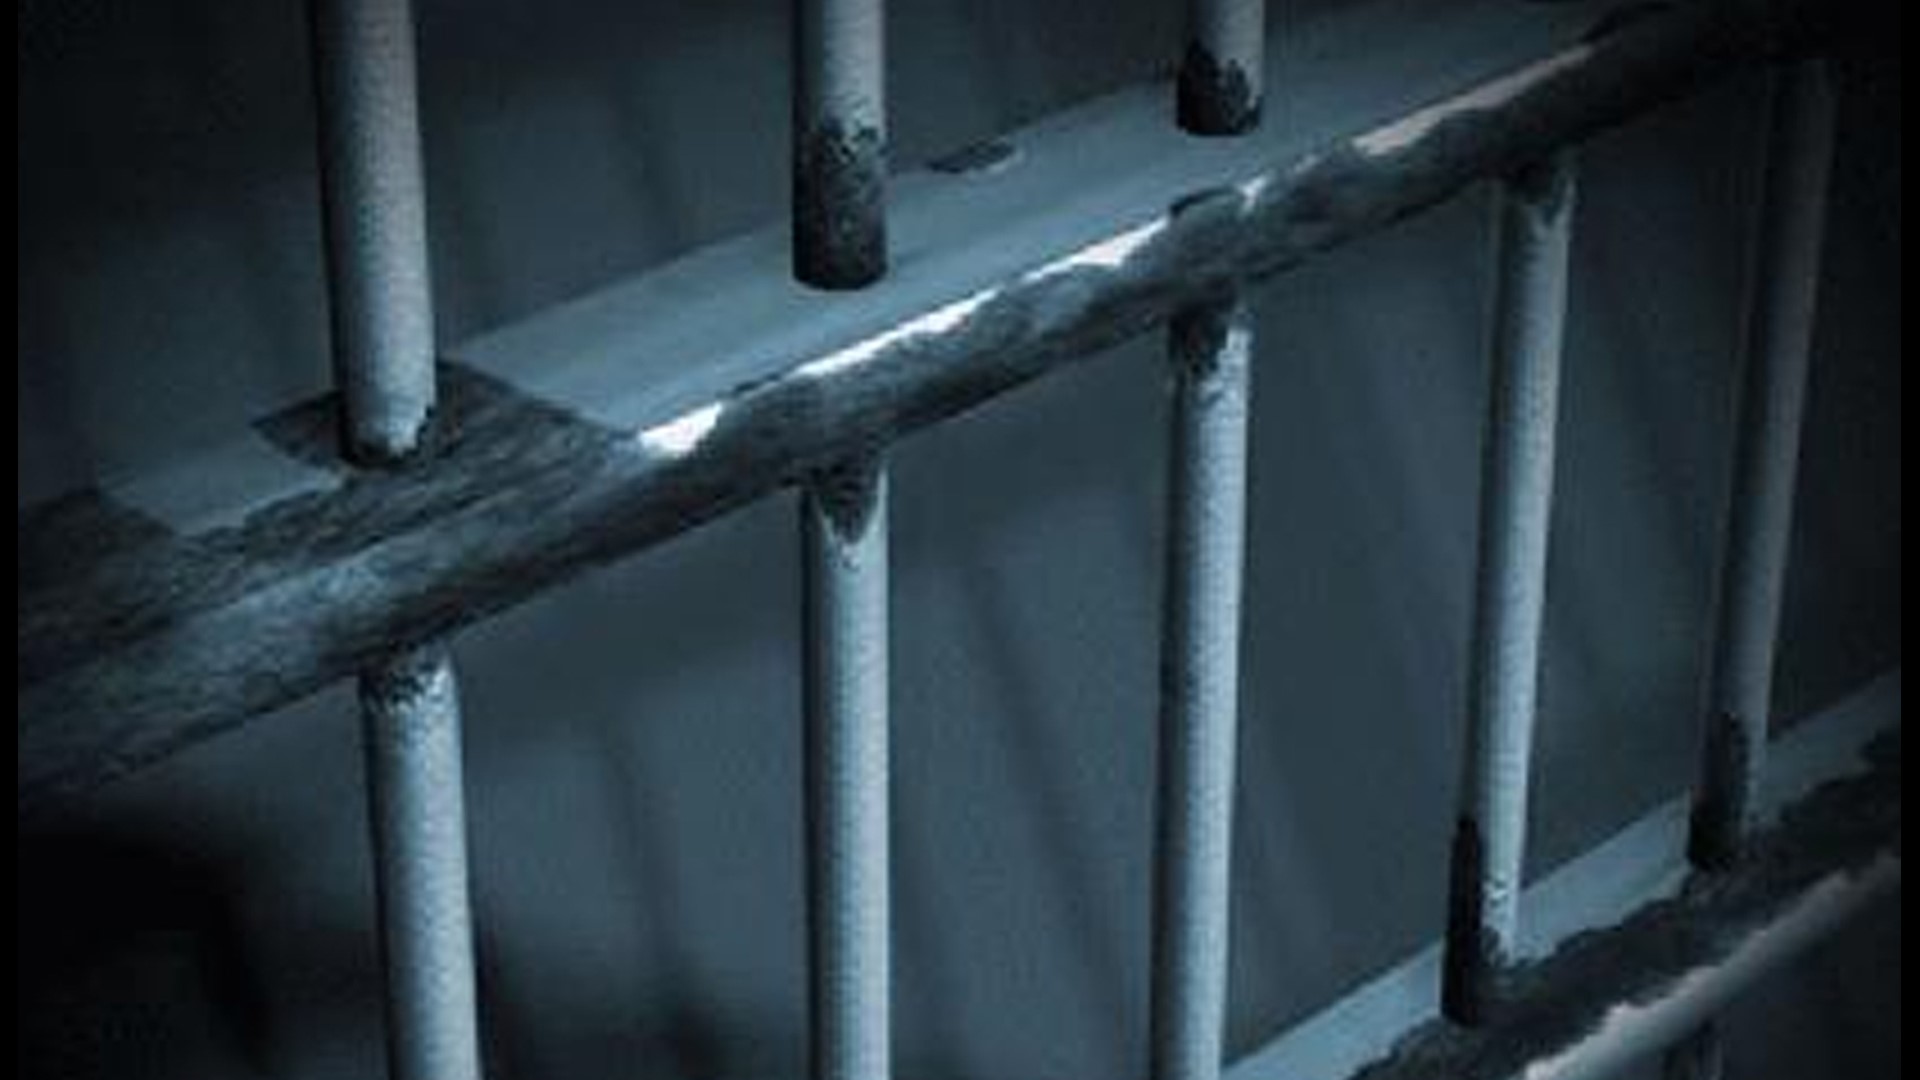 A woman is dead inside a North Mississippi jail, and two days after her death, jailers say they don't suspect foul play.